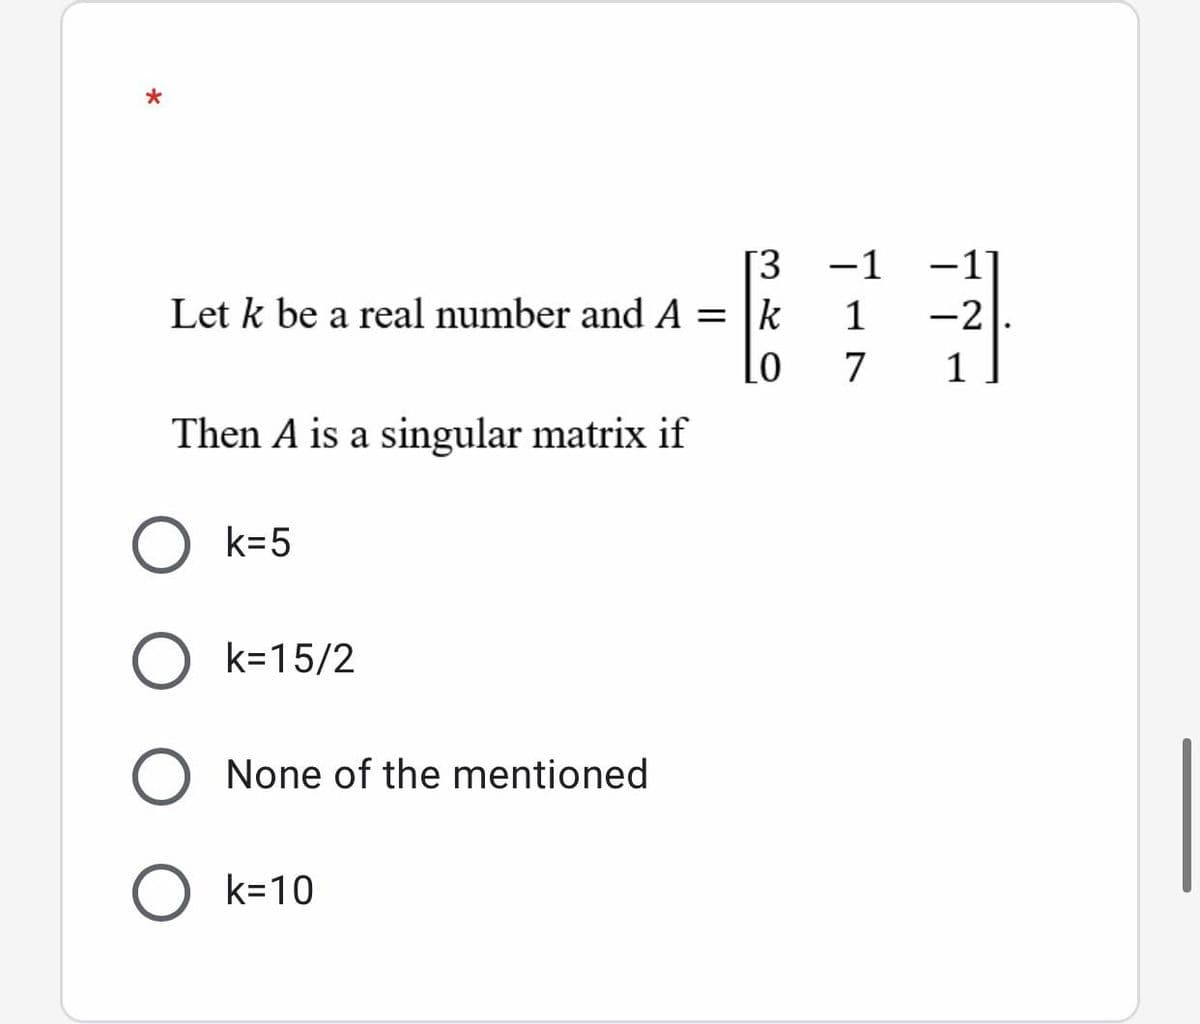 [3
Let k be a real number and A = |k
-1]
1
-1
-2
7
1
Then A is a singular matrix if
k=5
k=15/2
None of the mentioned
k=10
